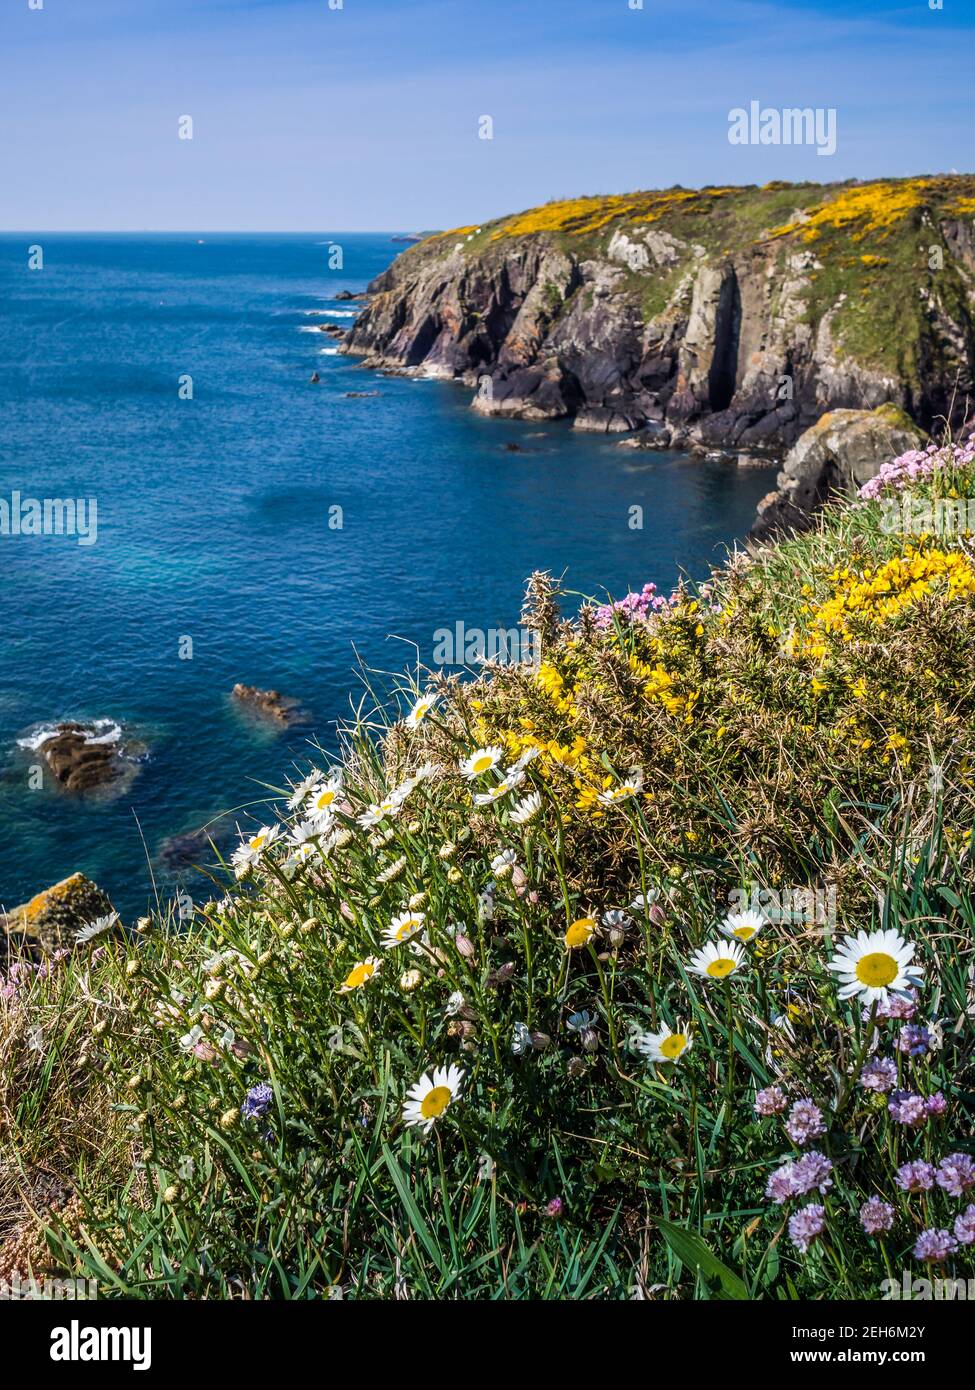 Sea pink flower, daisies and yellow gorse blooming on the cliff tops above St Non's Bay near St Davids in West Wales, reputedly the birthplace of St D Stock Photo